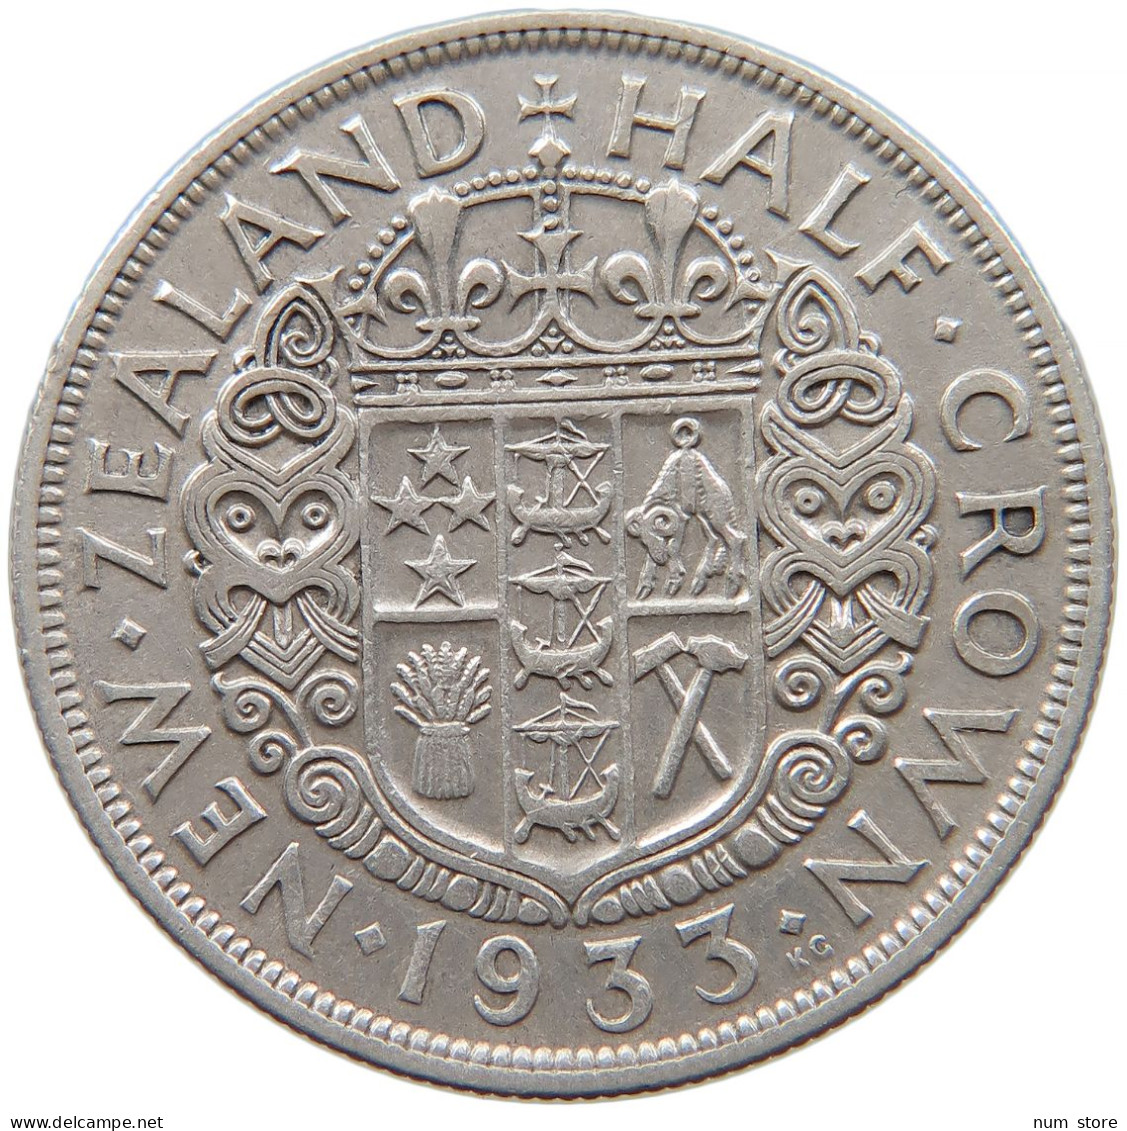 NEW ZEALAND 1/2 CROWN 1933 George V. (1910-1936) #t025 0161 - New Zealand